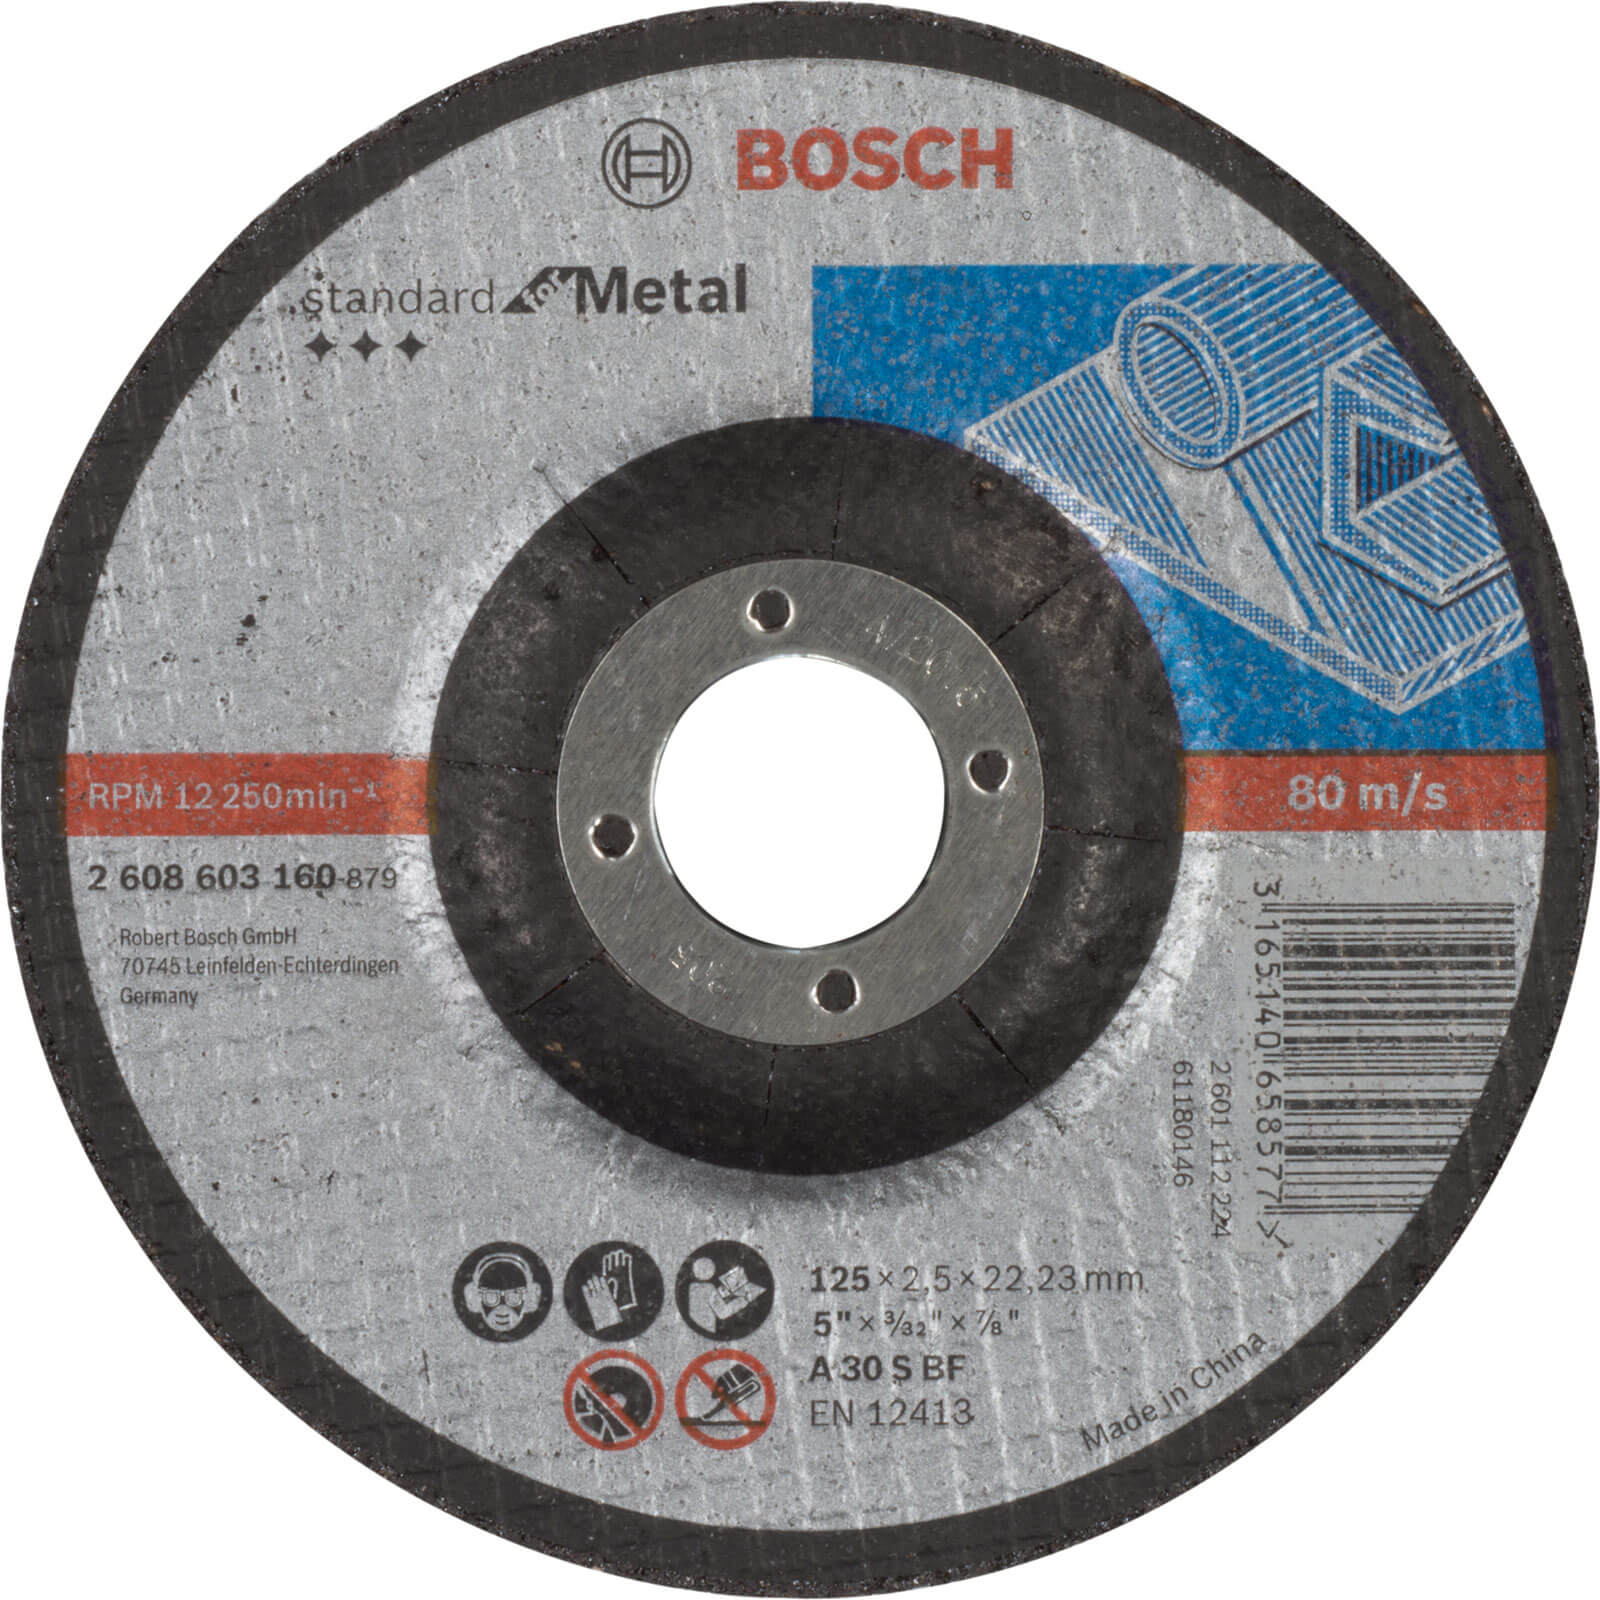 Image of Bosch Standard Depressed Centre Metal Cutting Disc 125mm 2.5mm 22mm